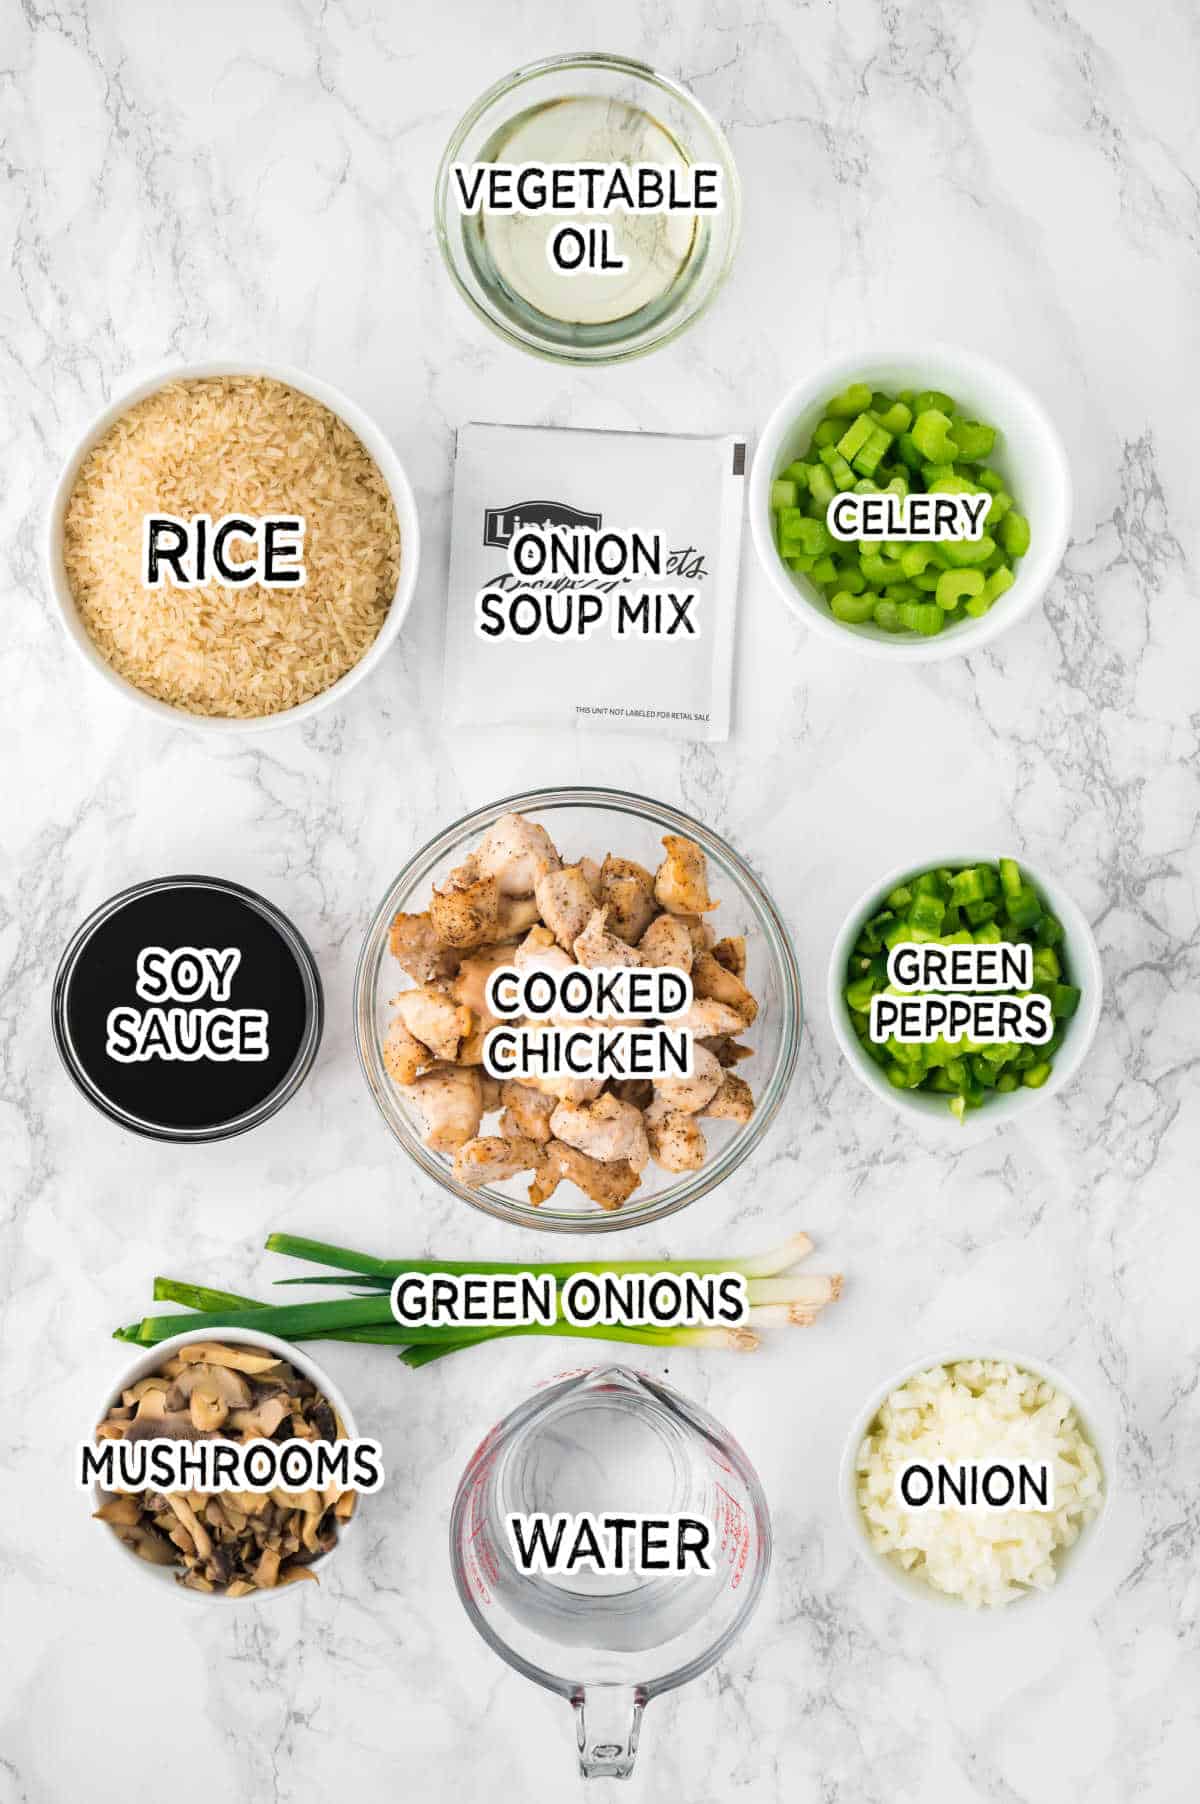 Ingredients to make oven baked chicken fried rice.